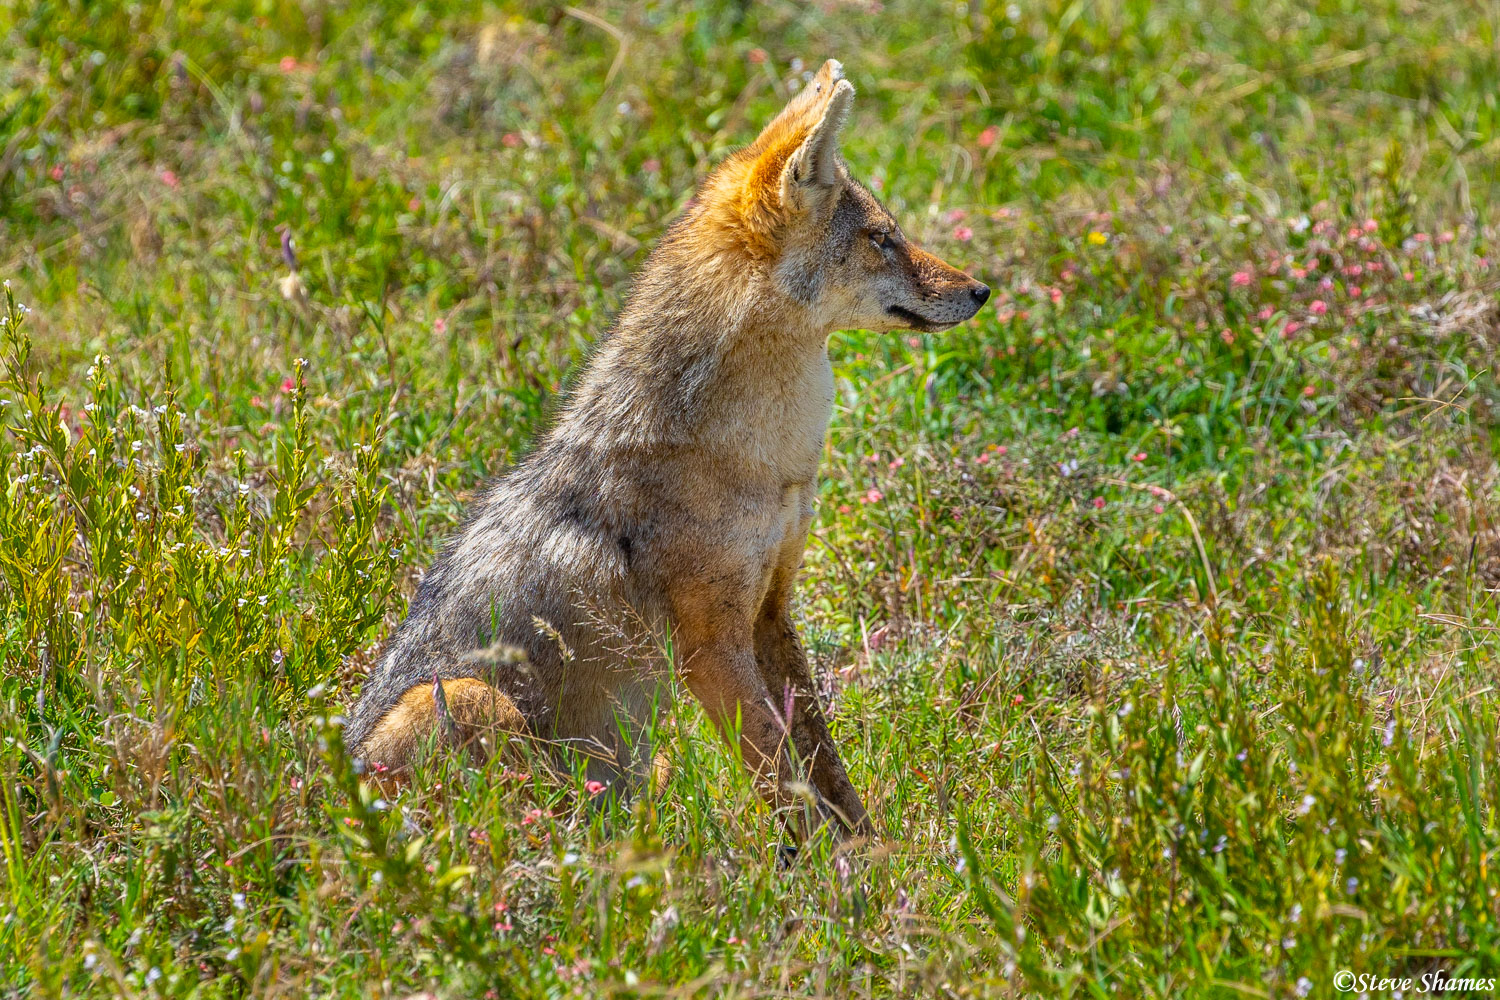 A handsome looking jackal sitting in the grass.